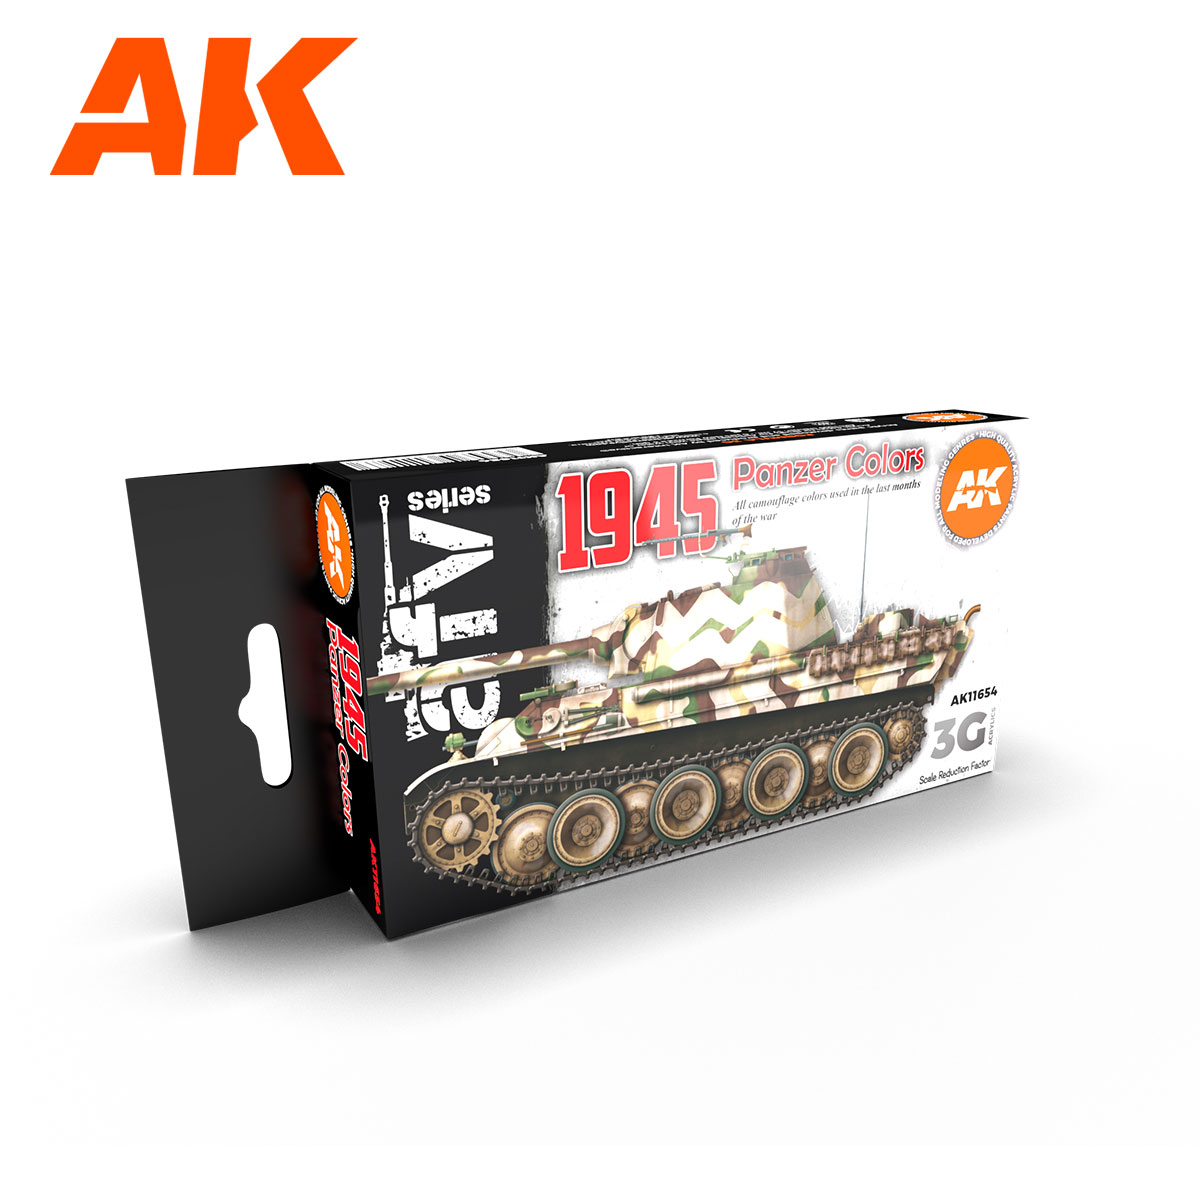 Buy 1945 PANZER COLORS online for 16,50€